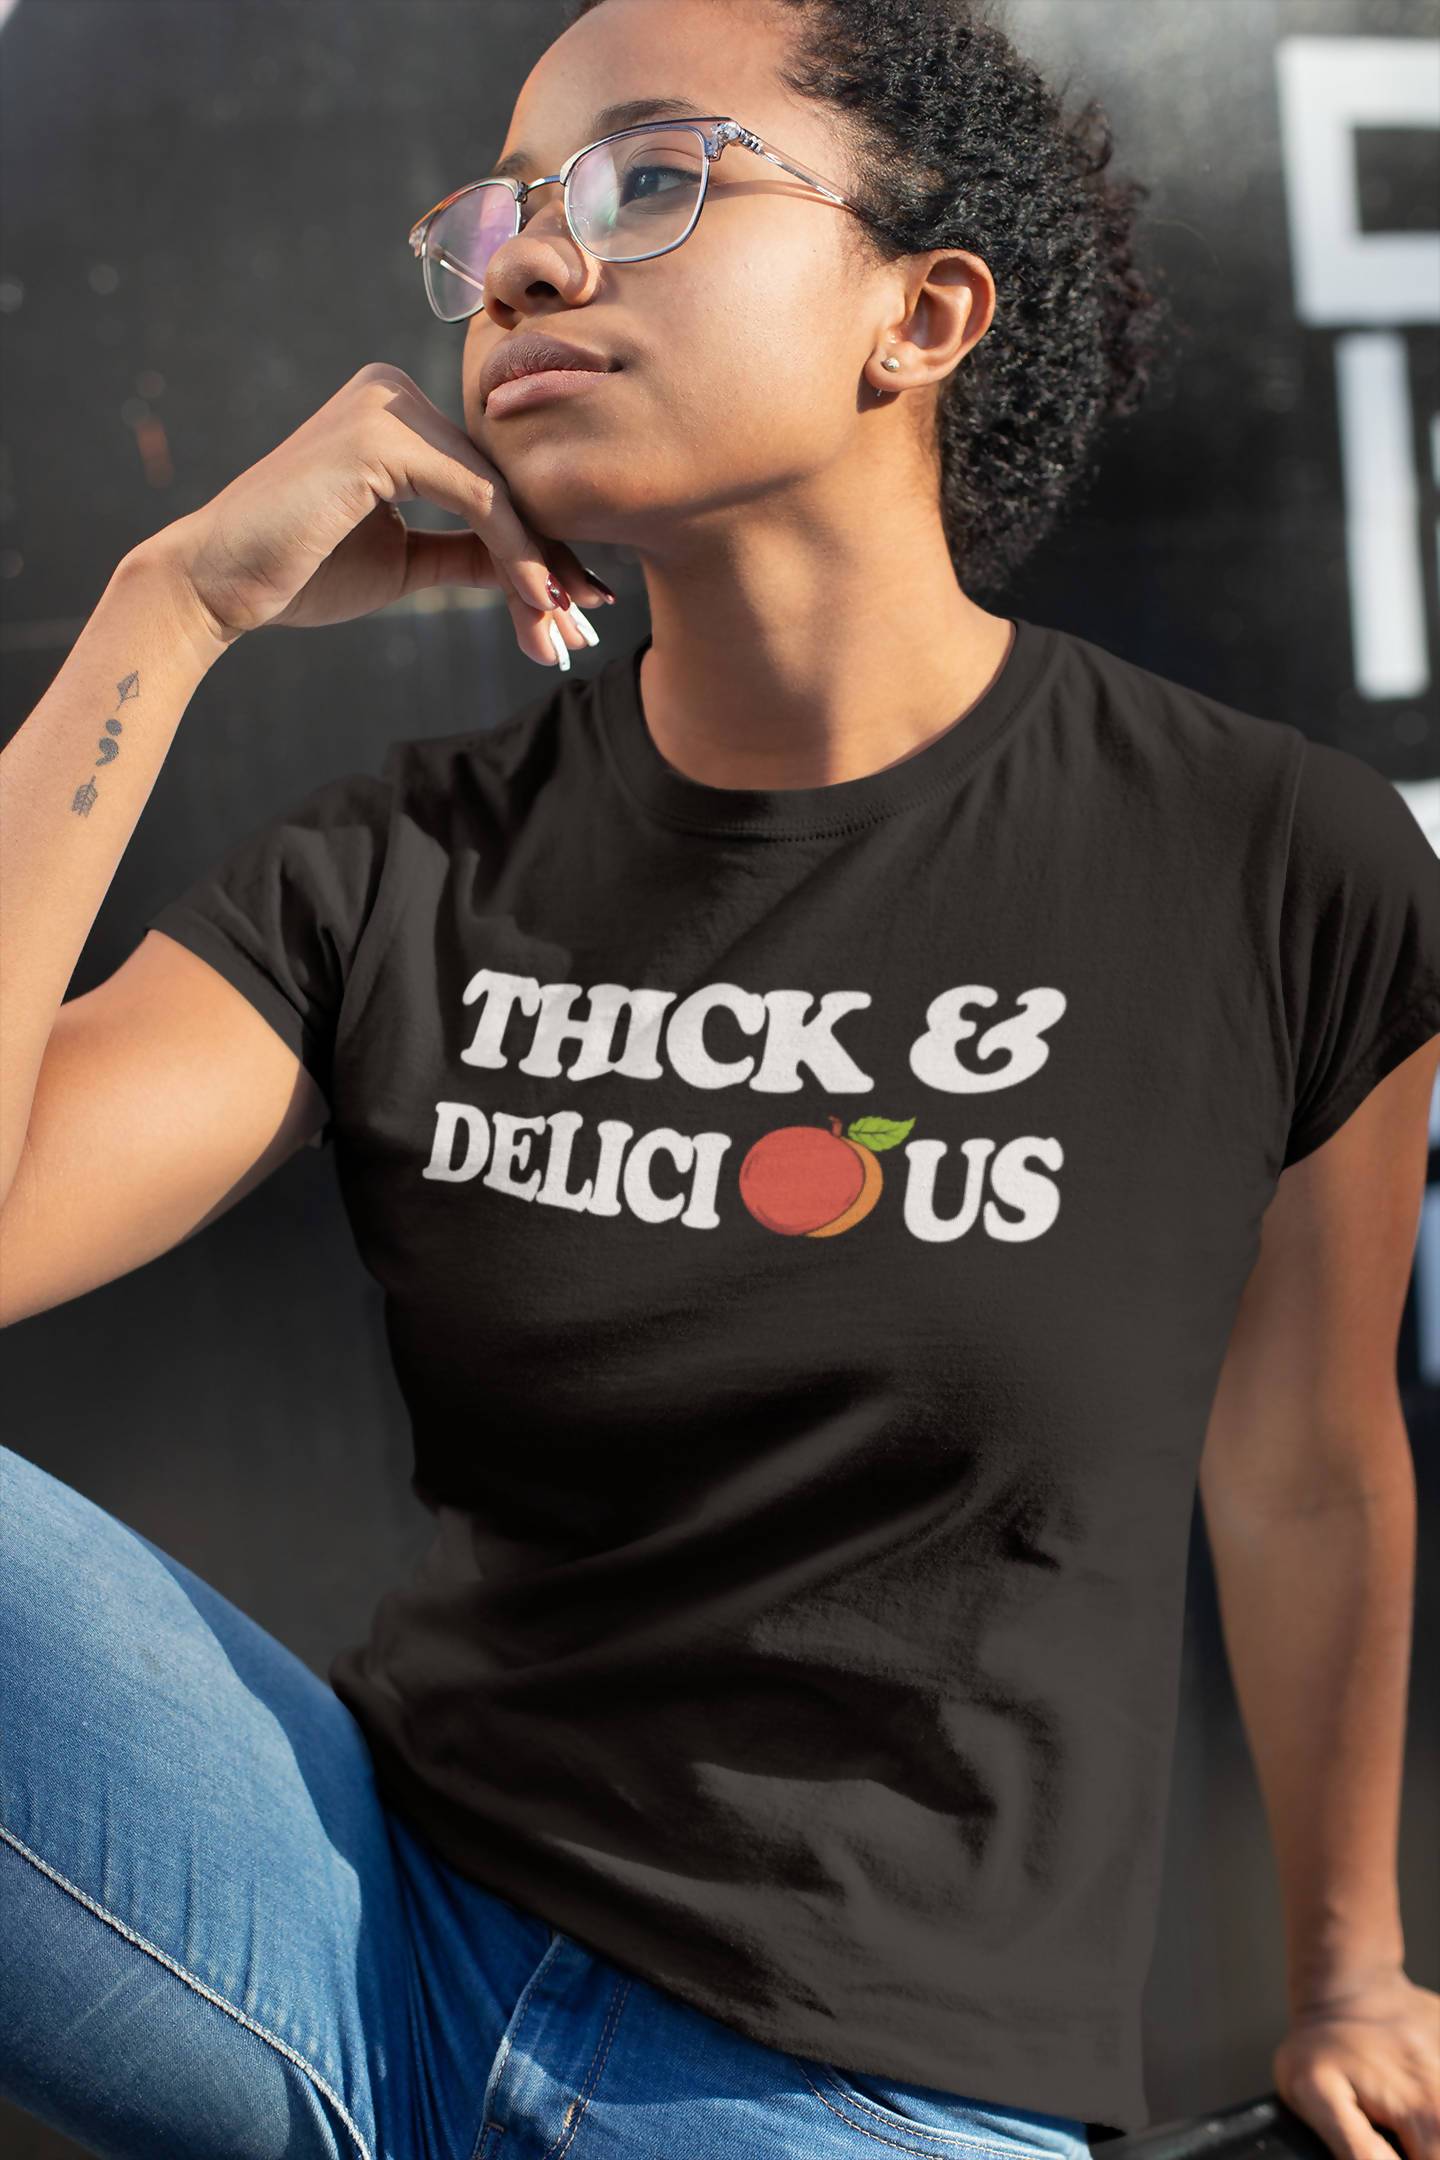 Thick & Delicious Ladies T-Shirt - FulFill4me - 3J Tee's & More